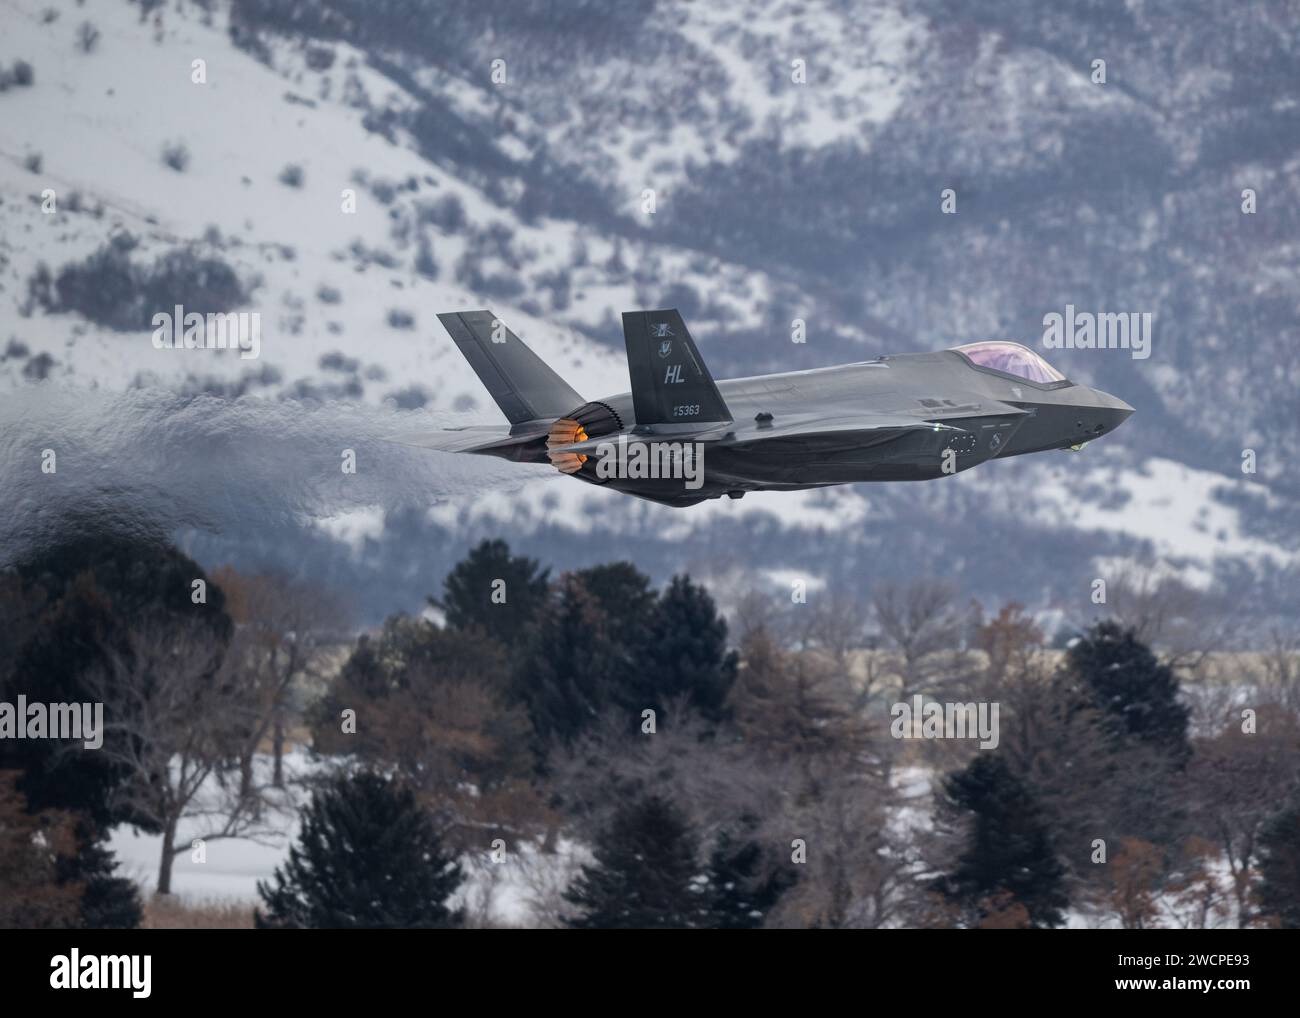 A U.S. Air Force F-35A Lightning II assigned to the F-35A Lightning II Demonstration Team performs a practice airshow performance at Hill Air Force Base, Utah, Jan. 11, 2023. The F-35 Demo Team performs rehearsal flights regularly to maintain required flying certifications and to uphold and maintain their mission and Air Force recruiting standards. (U.S. Air Force photo by Staff Sgt. Kaitlyn Ergish) Stock Photo